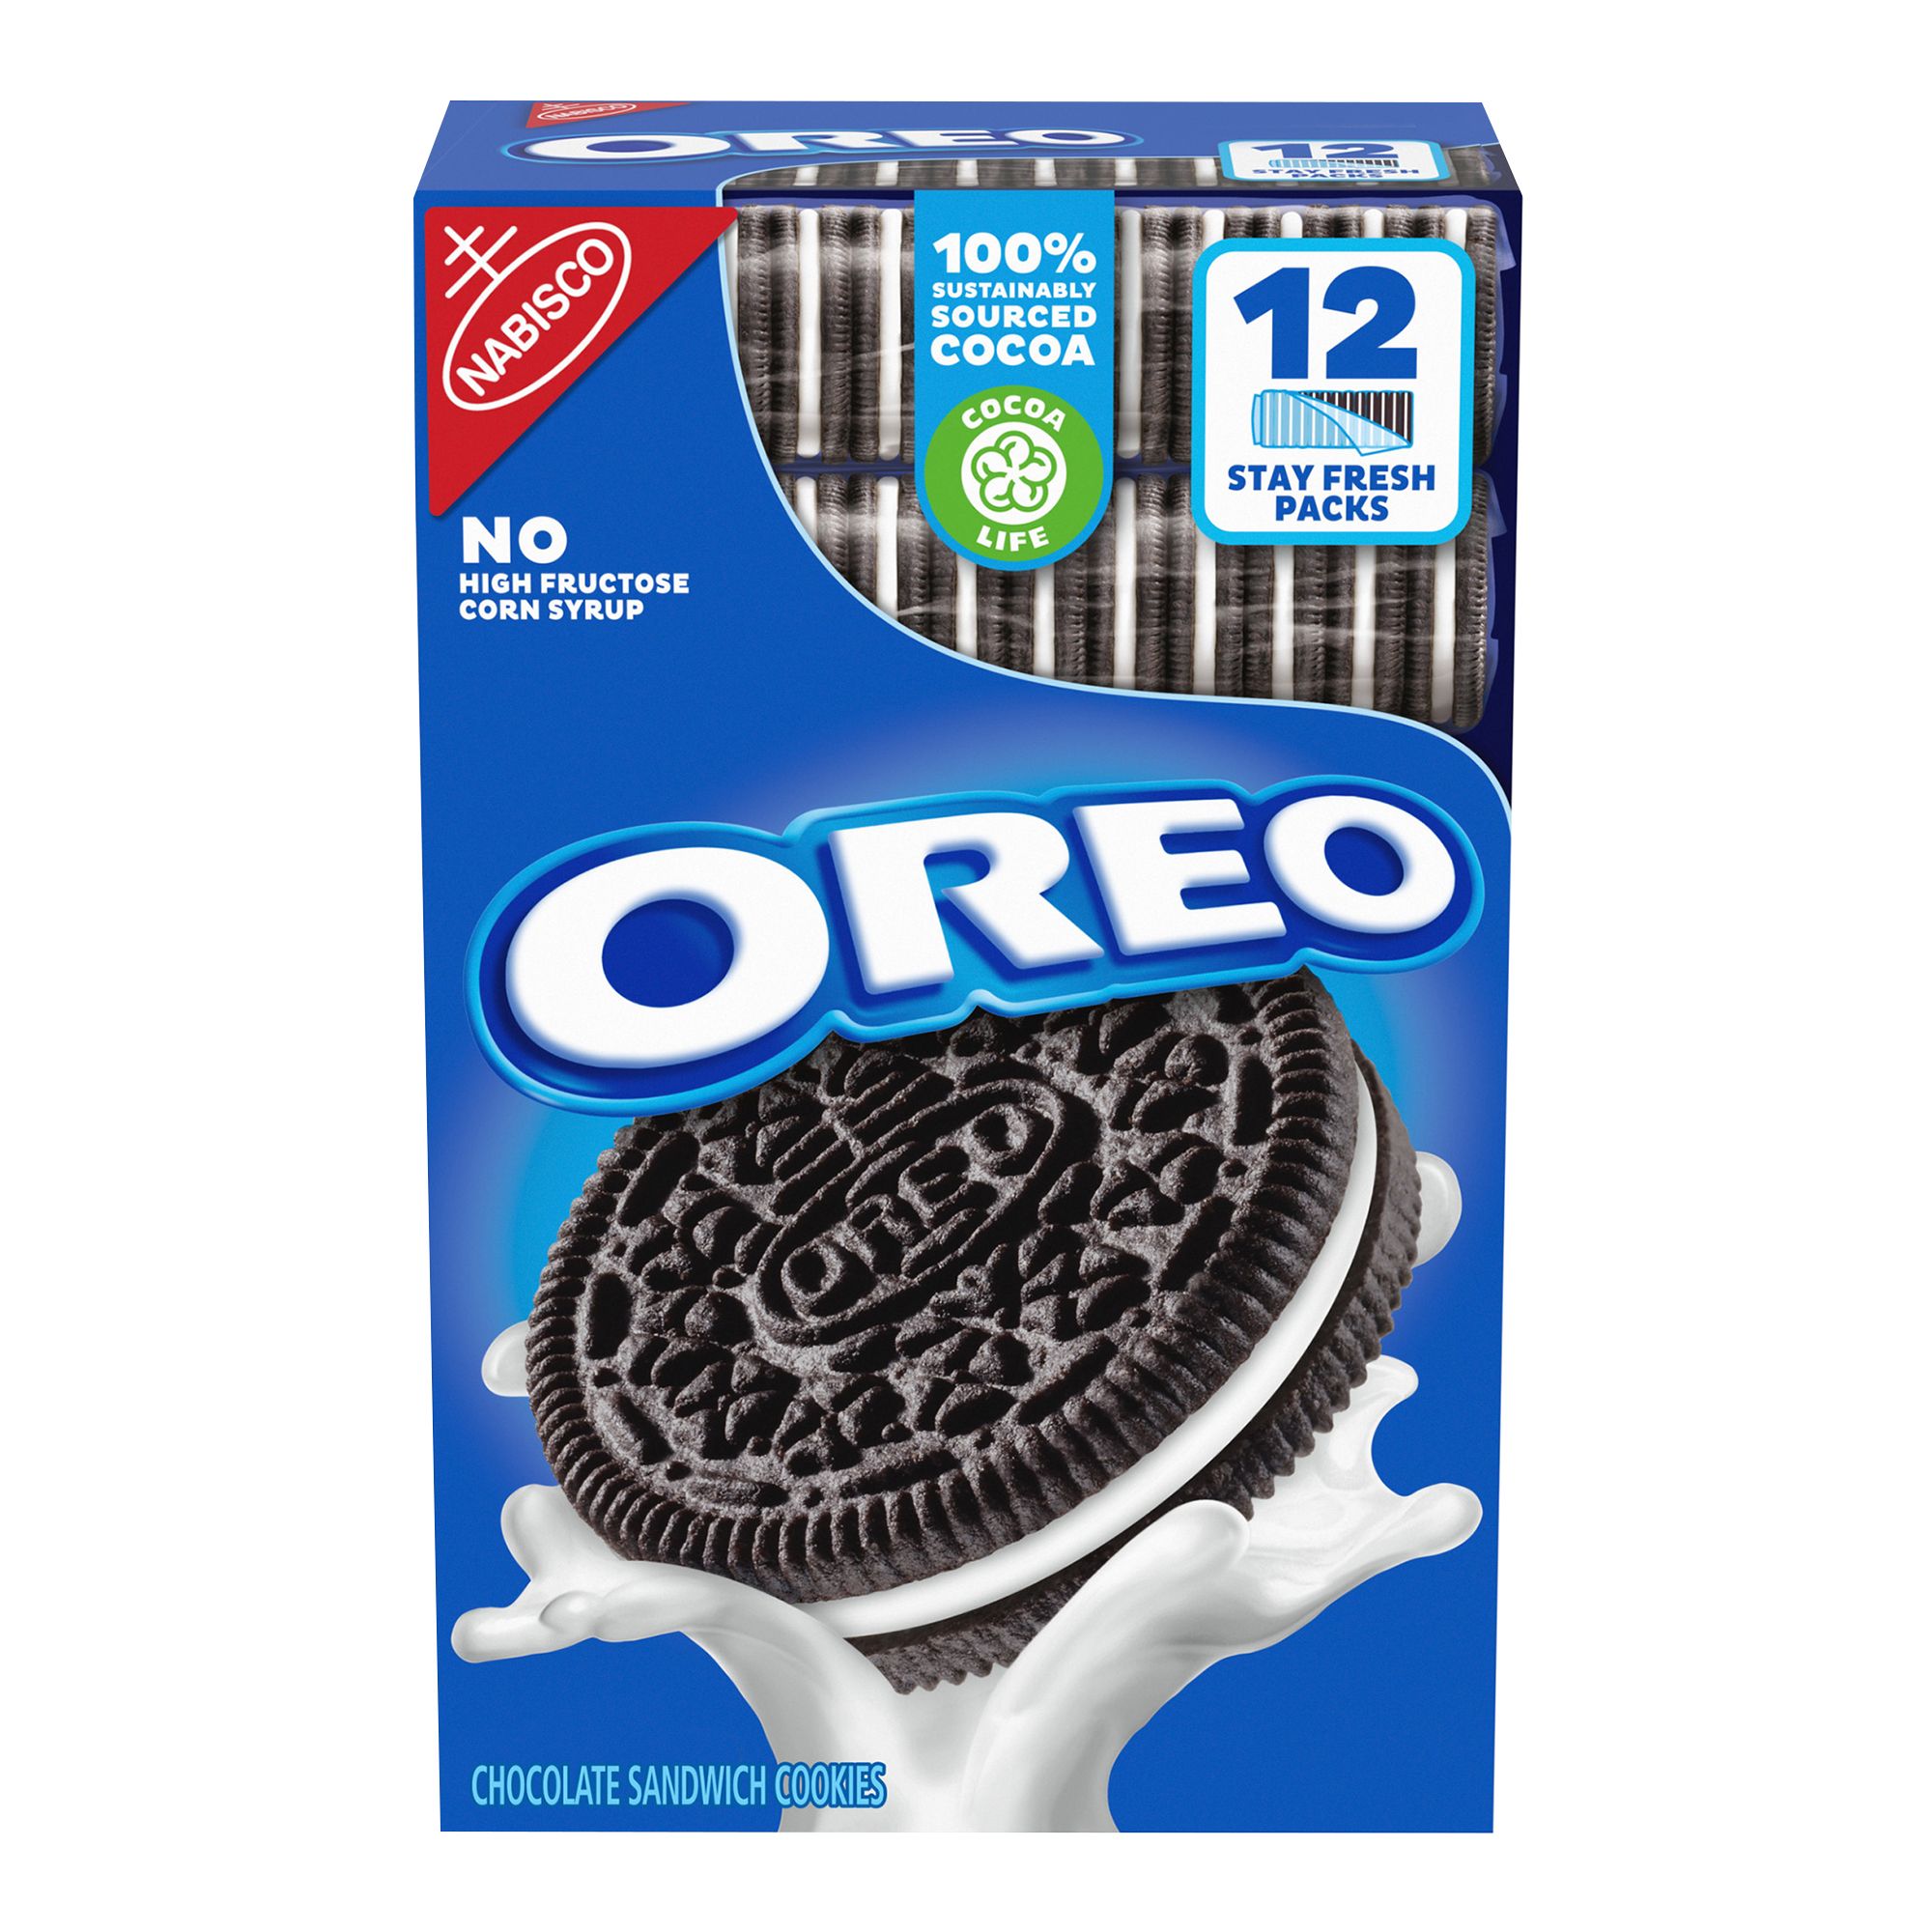 A History of the Oreo Cookie